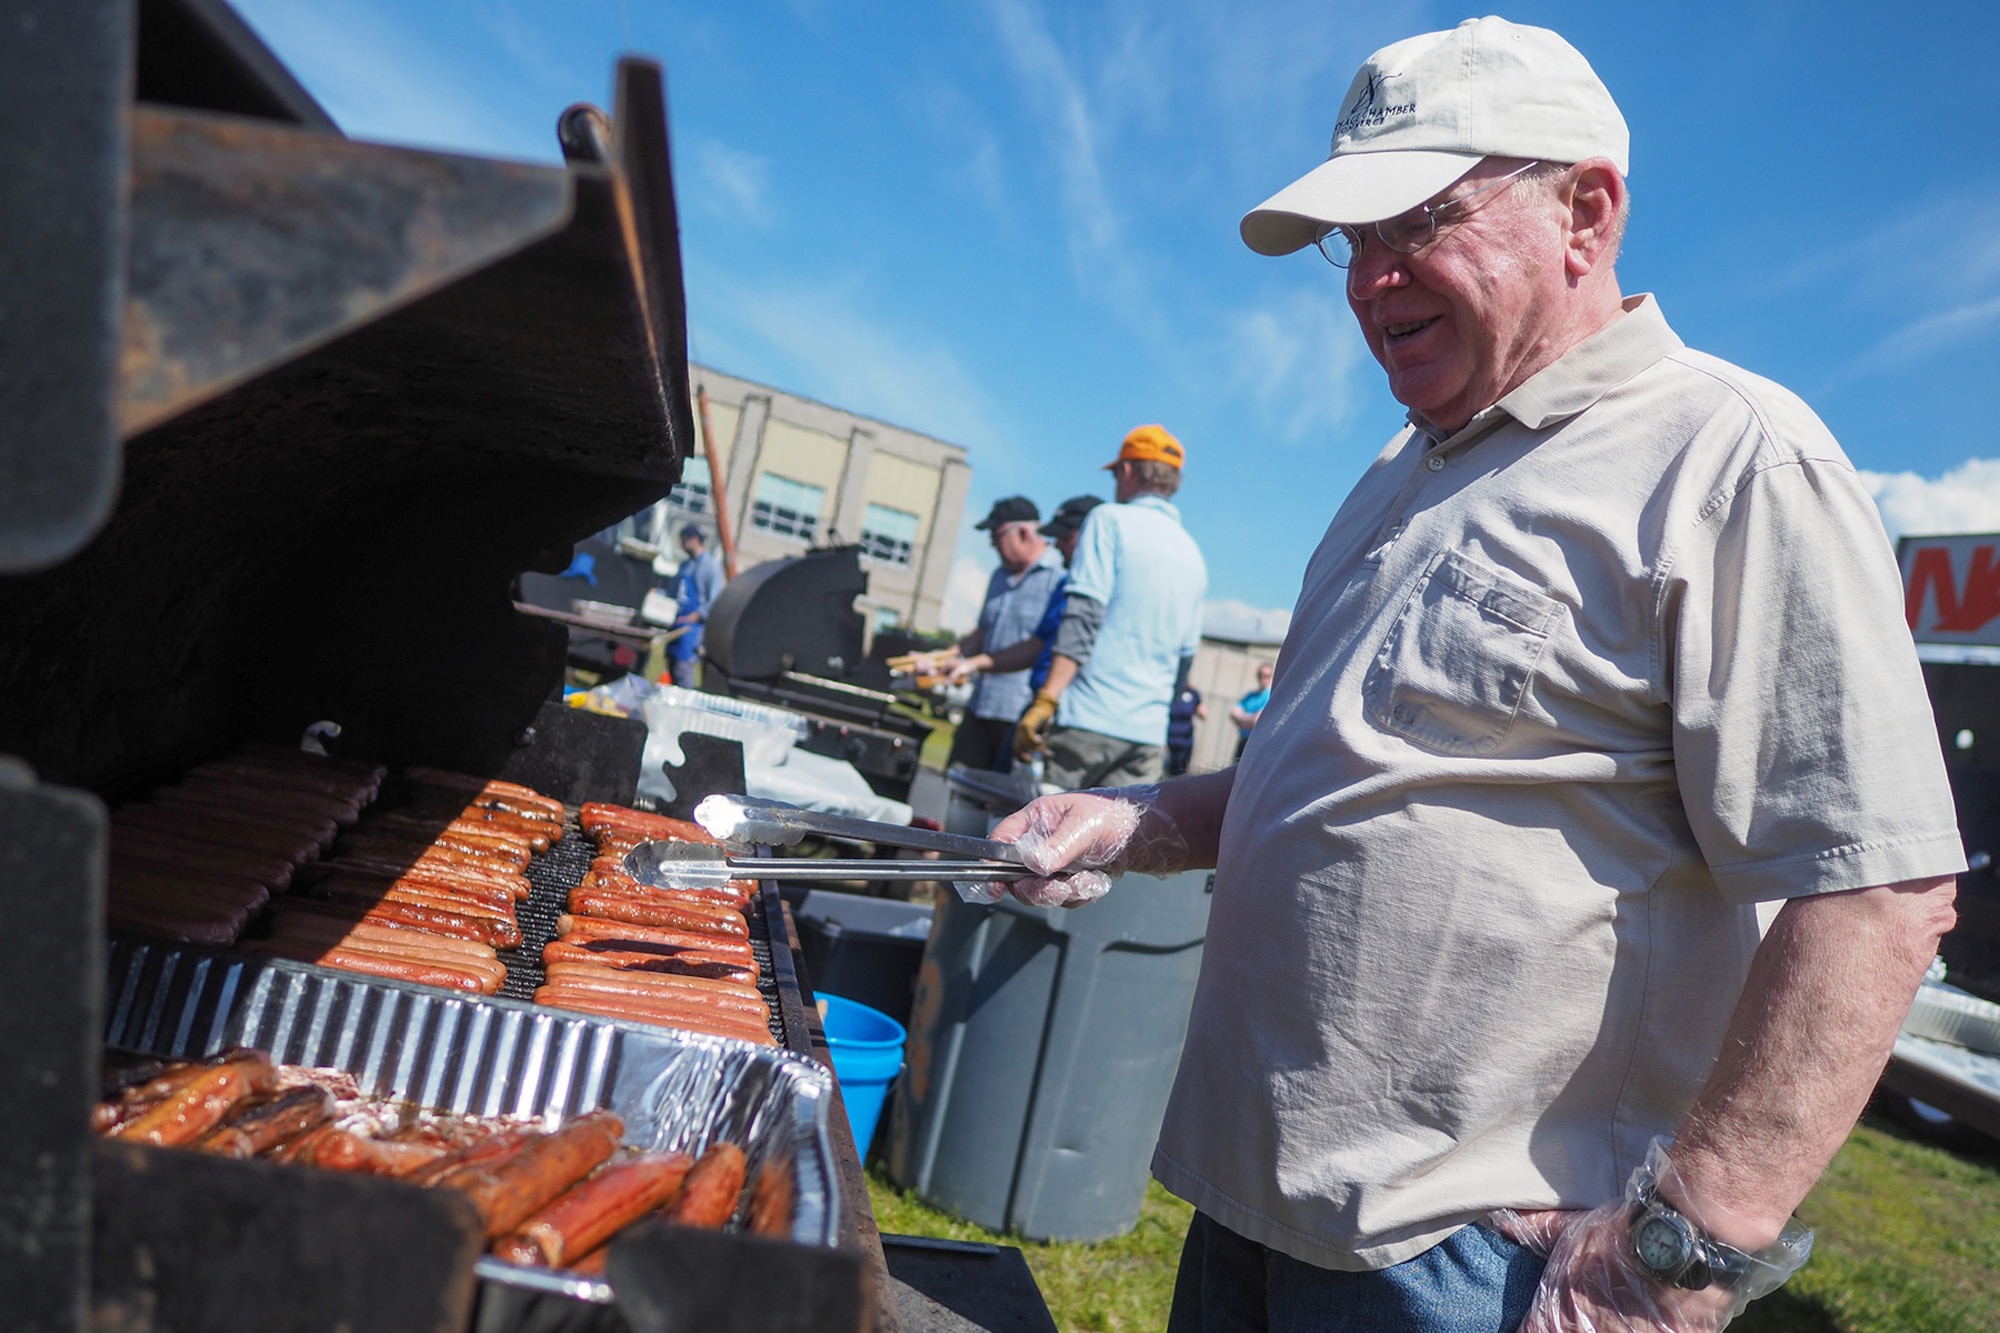 Chris Nelson, of Anchorage, representing the Association of the United States Army, grills hot dogs as service members, dependents, and Department of Defense civilians attend the Military Appreciation Week picnic at the Joint Base Elmendorf-Richardson, Alaska, Buckner Fitness Center fields June 16, 2017. Several organizations came together to provide a variety of family-fun activities such as competitive sporting events for the adults, face painting and bouncy houses for the children in addition to the Anchorage Chamber of Commerce-provided food and music during the annual event.